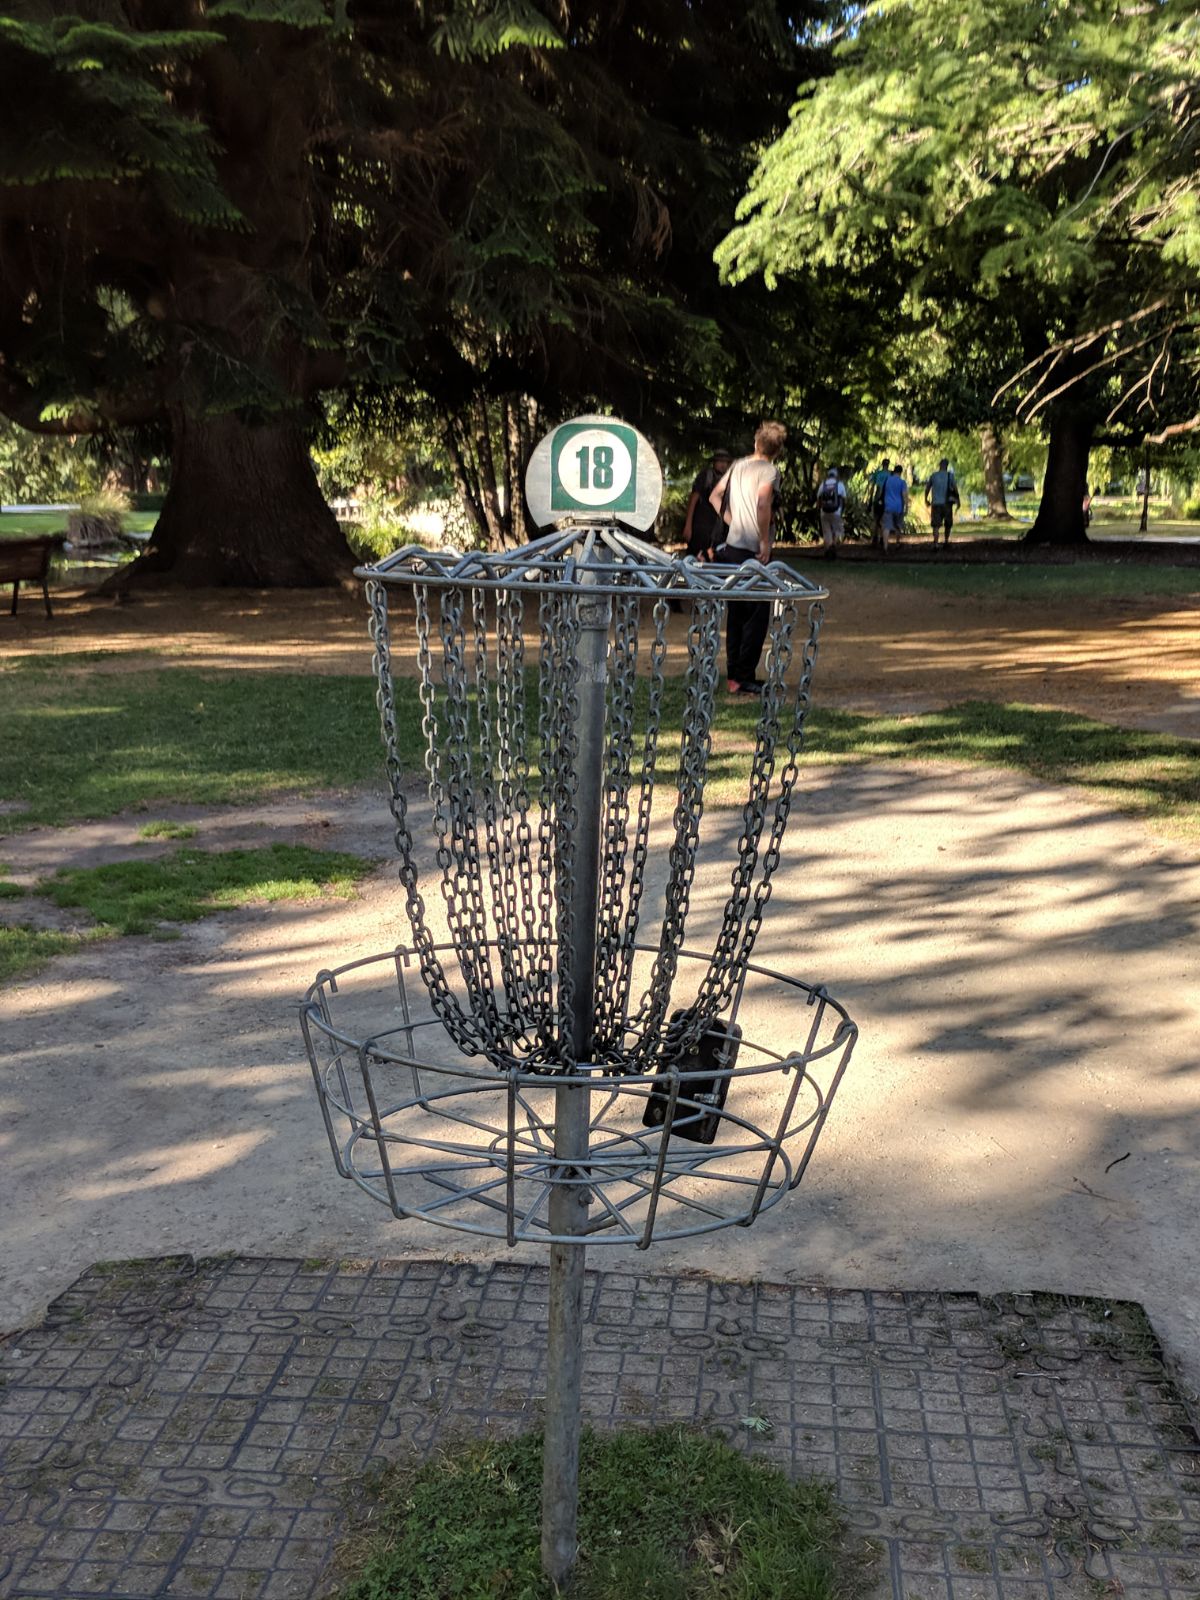 151--everyone seemed to be playing frisbee golf in this park